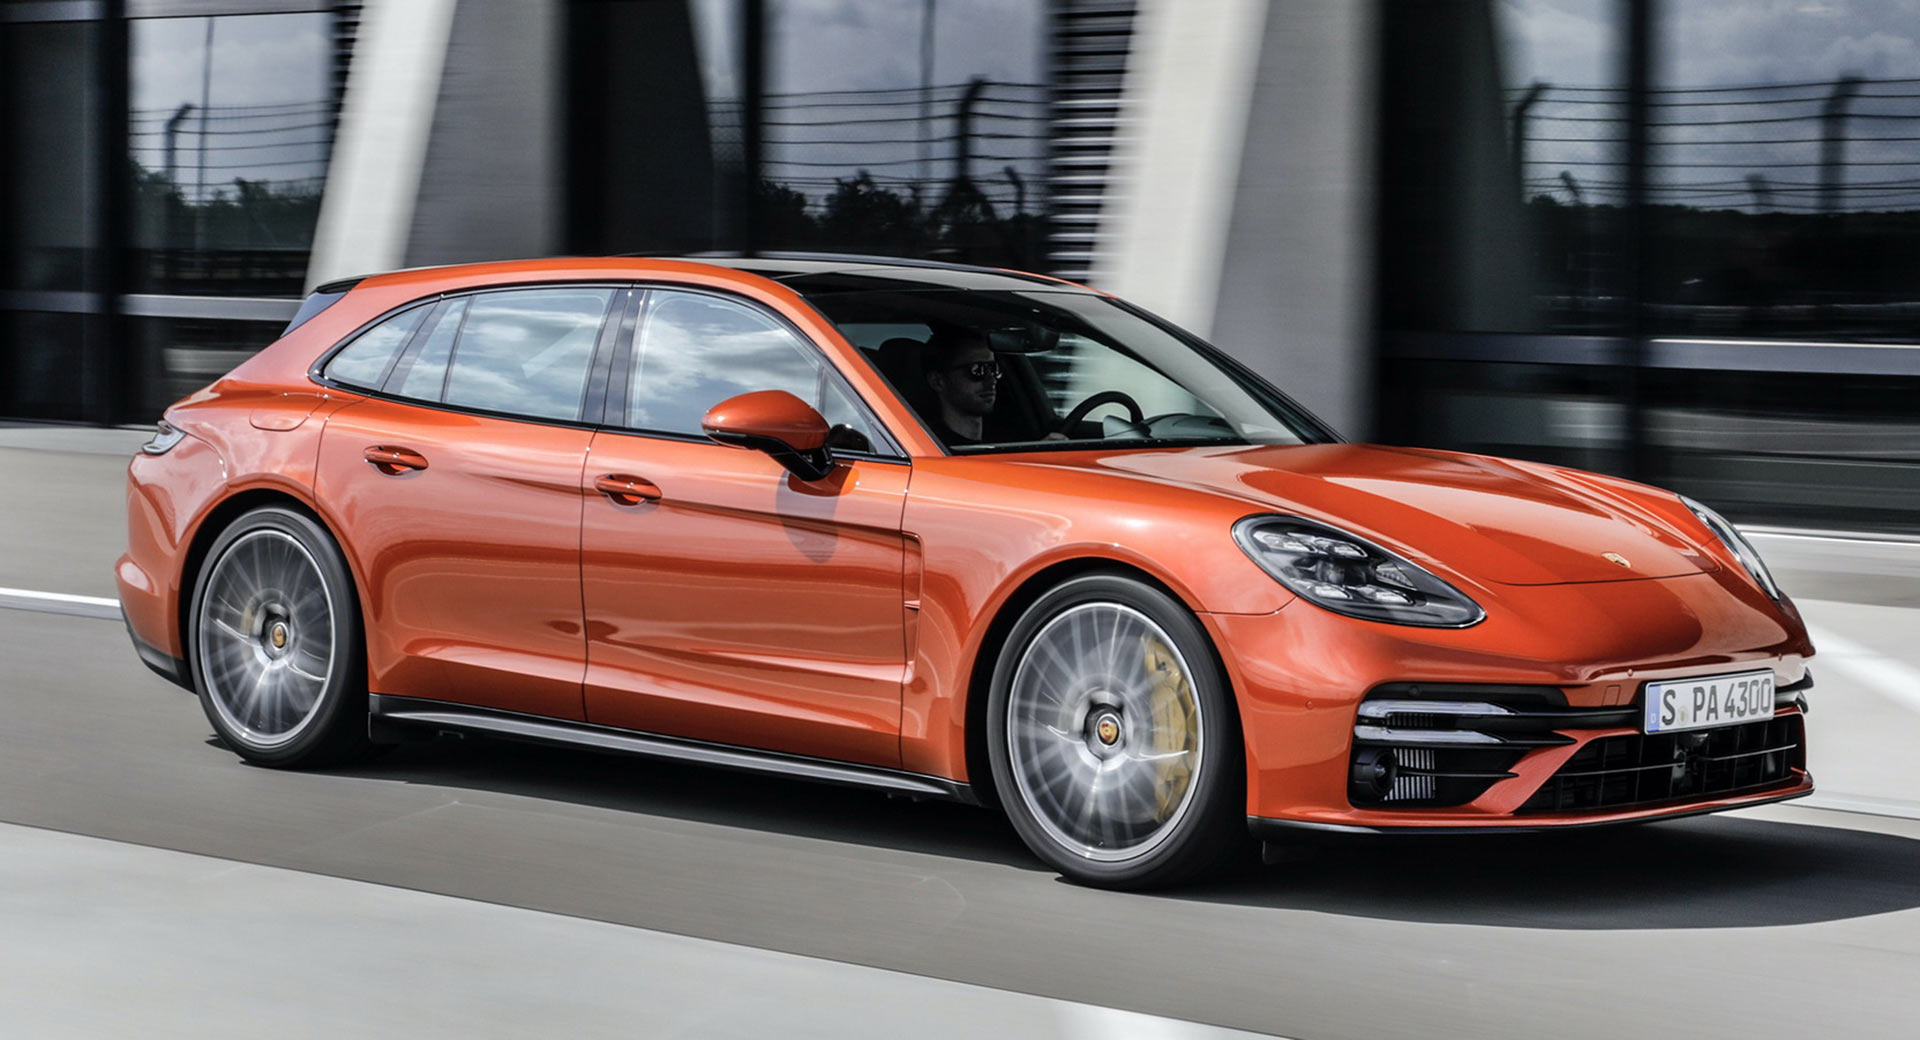 New Porsche Panamera Turbo S E-Hybrid Is Coming Very Soon | Carscoops